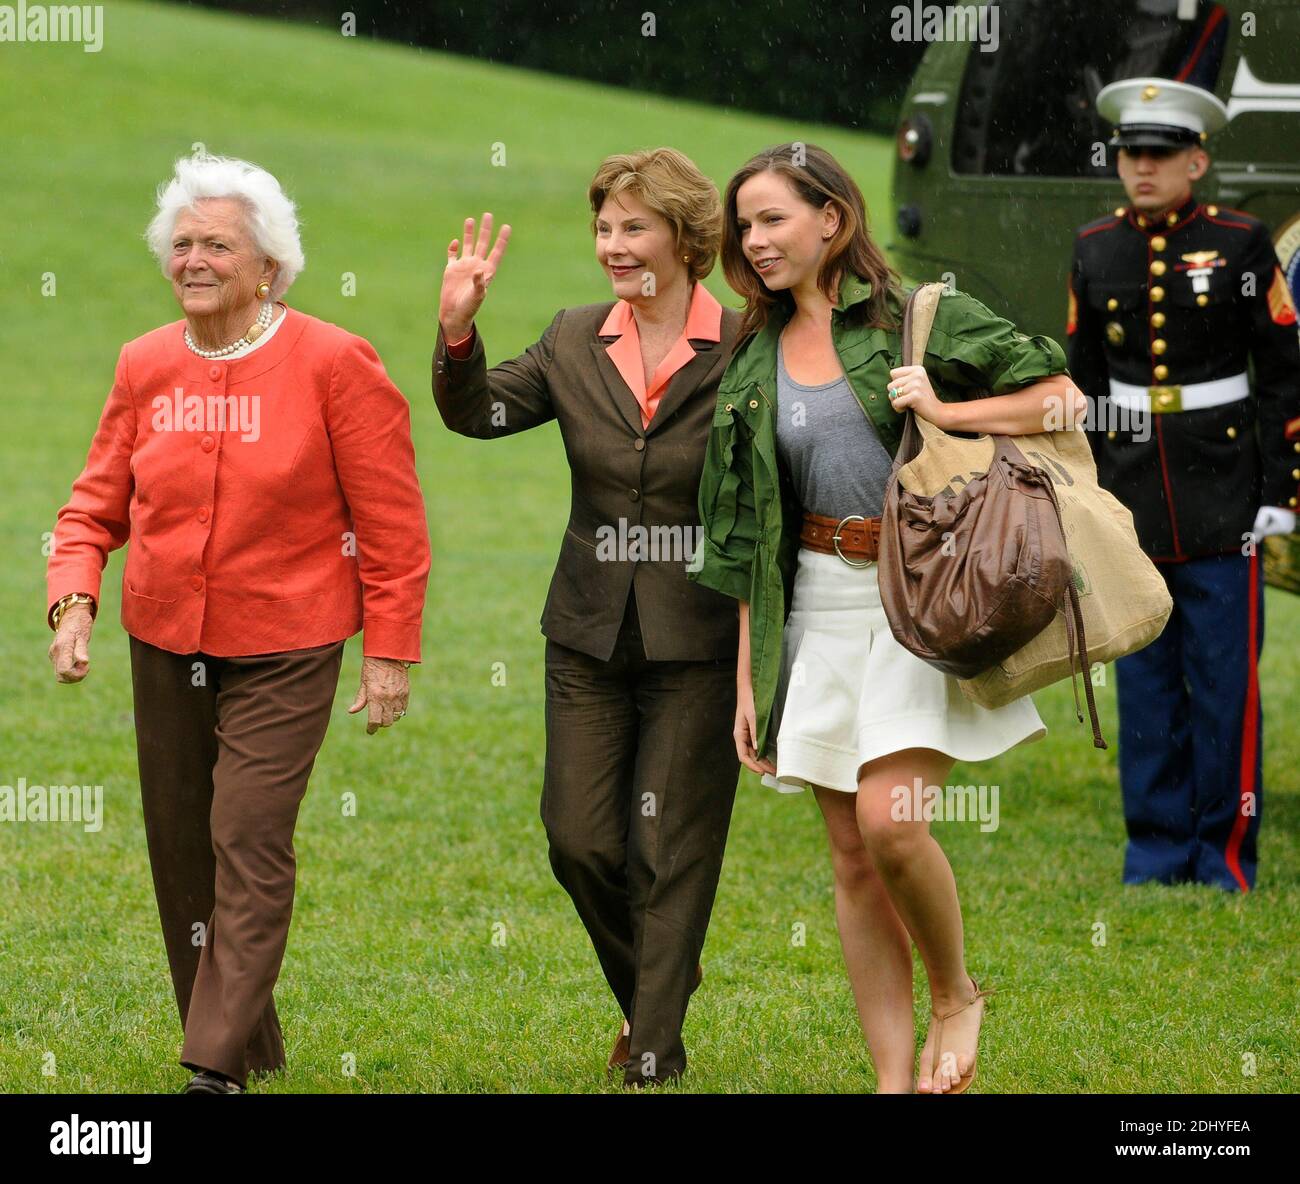 First lady Laura Bush waves to onlookers as she walks with former first lady Barbara Bush (L) and daughter Barbara as they arrive at the White from a weekend at the Crawford, Texas ranch, 11 May 2008 in Washington, DC, USA. United States President George W. Bush, whose daughter Jenna married Henry Hager at the ranch, described the experience as 'spectacular' and 'it's all we could have hoped for'. Photo by Mike Theiler/CNP/ABACAPRESS.COM Stock Photo